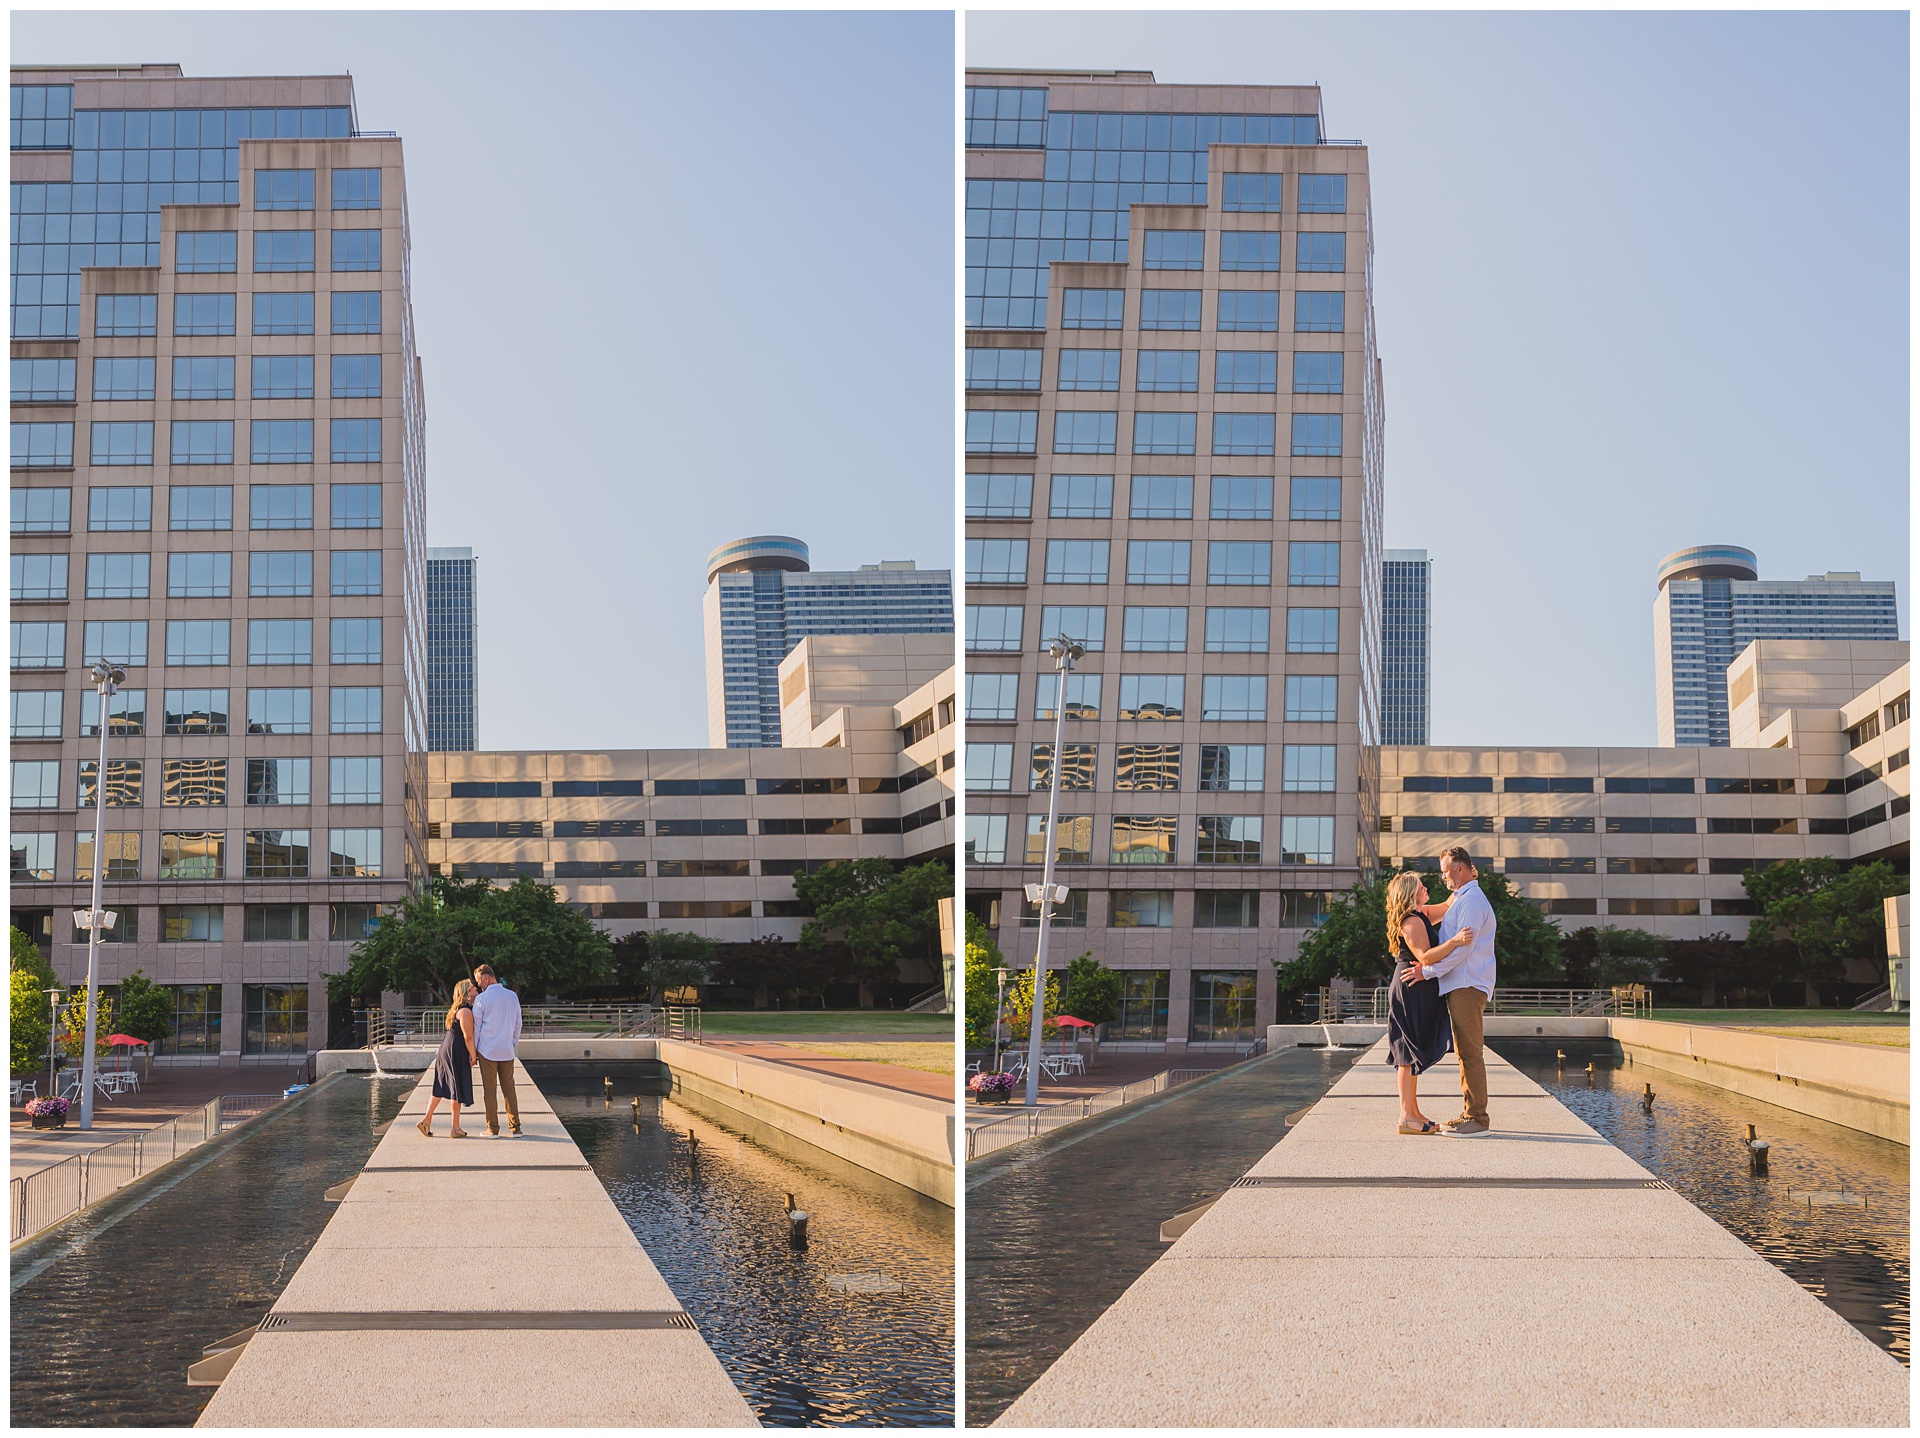 Engagement photography at Crown Center and Liberty Memorial by Kansas City wedding photographers Wisdom-Watson Weddings.